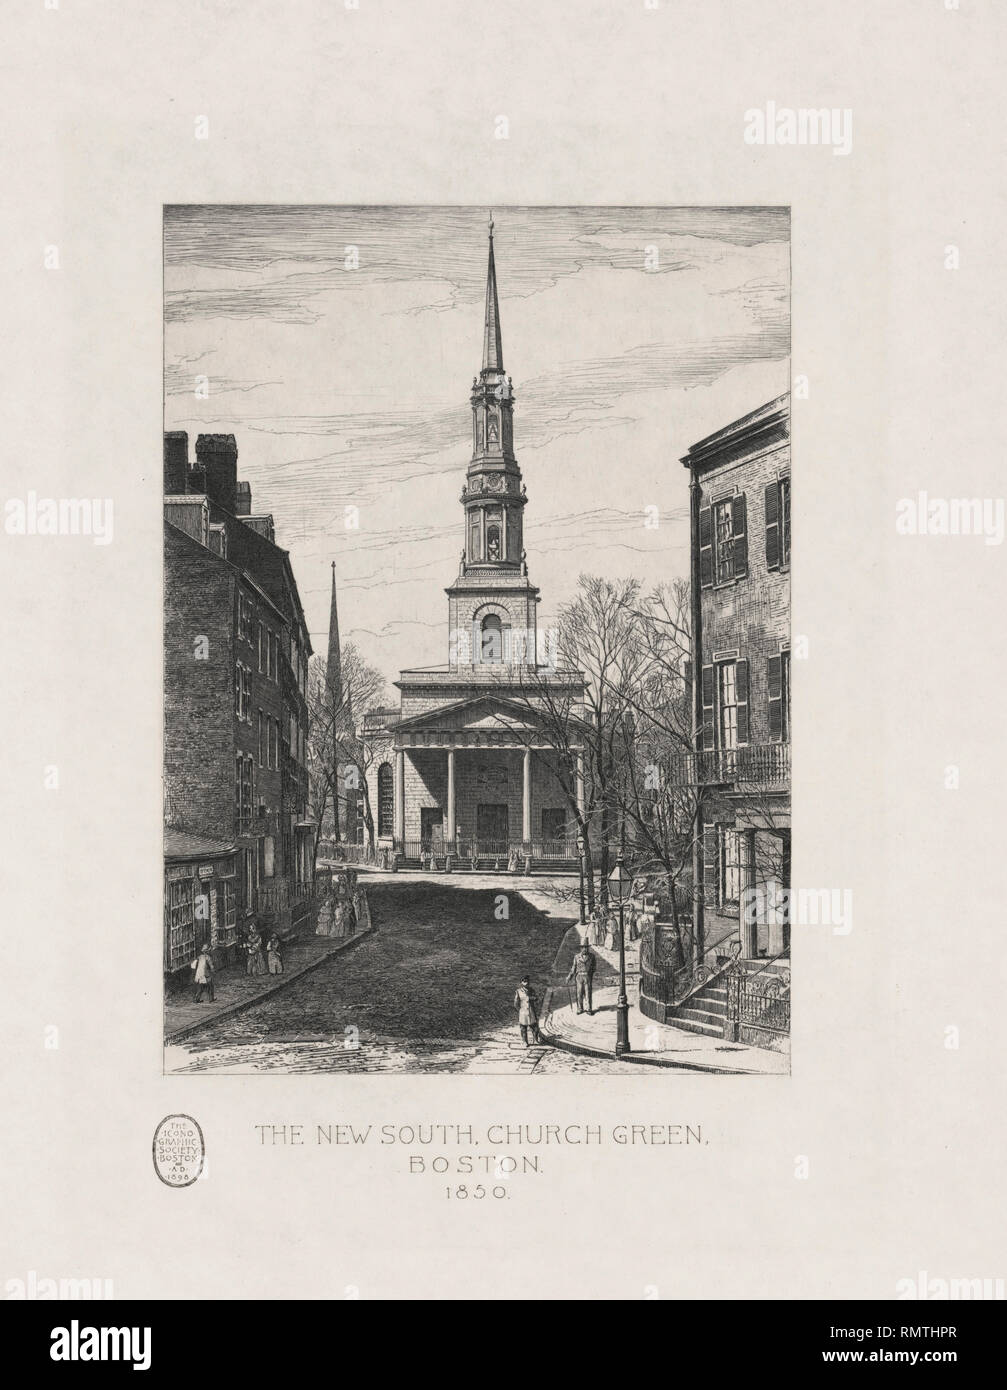 The New South, Church Green, Boston, 1850, Etching by Sidney Lawton Smith, Published by the Iconographic Society, 1898 Stock Photo